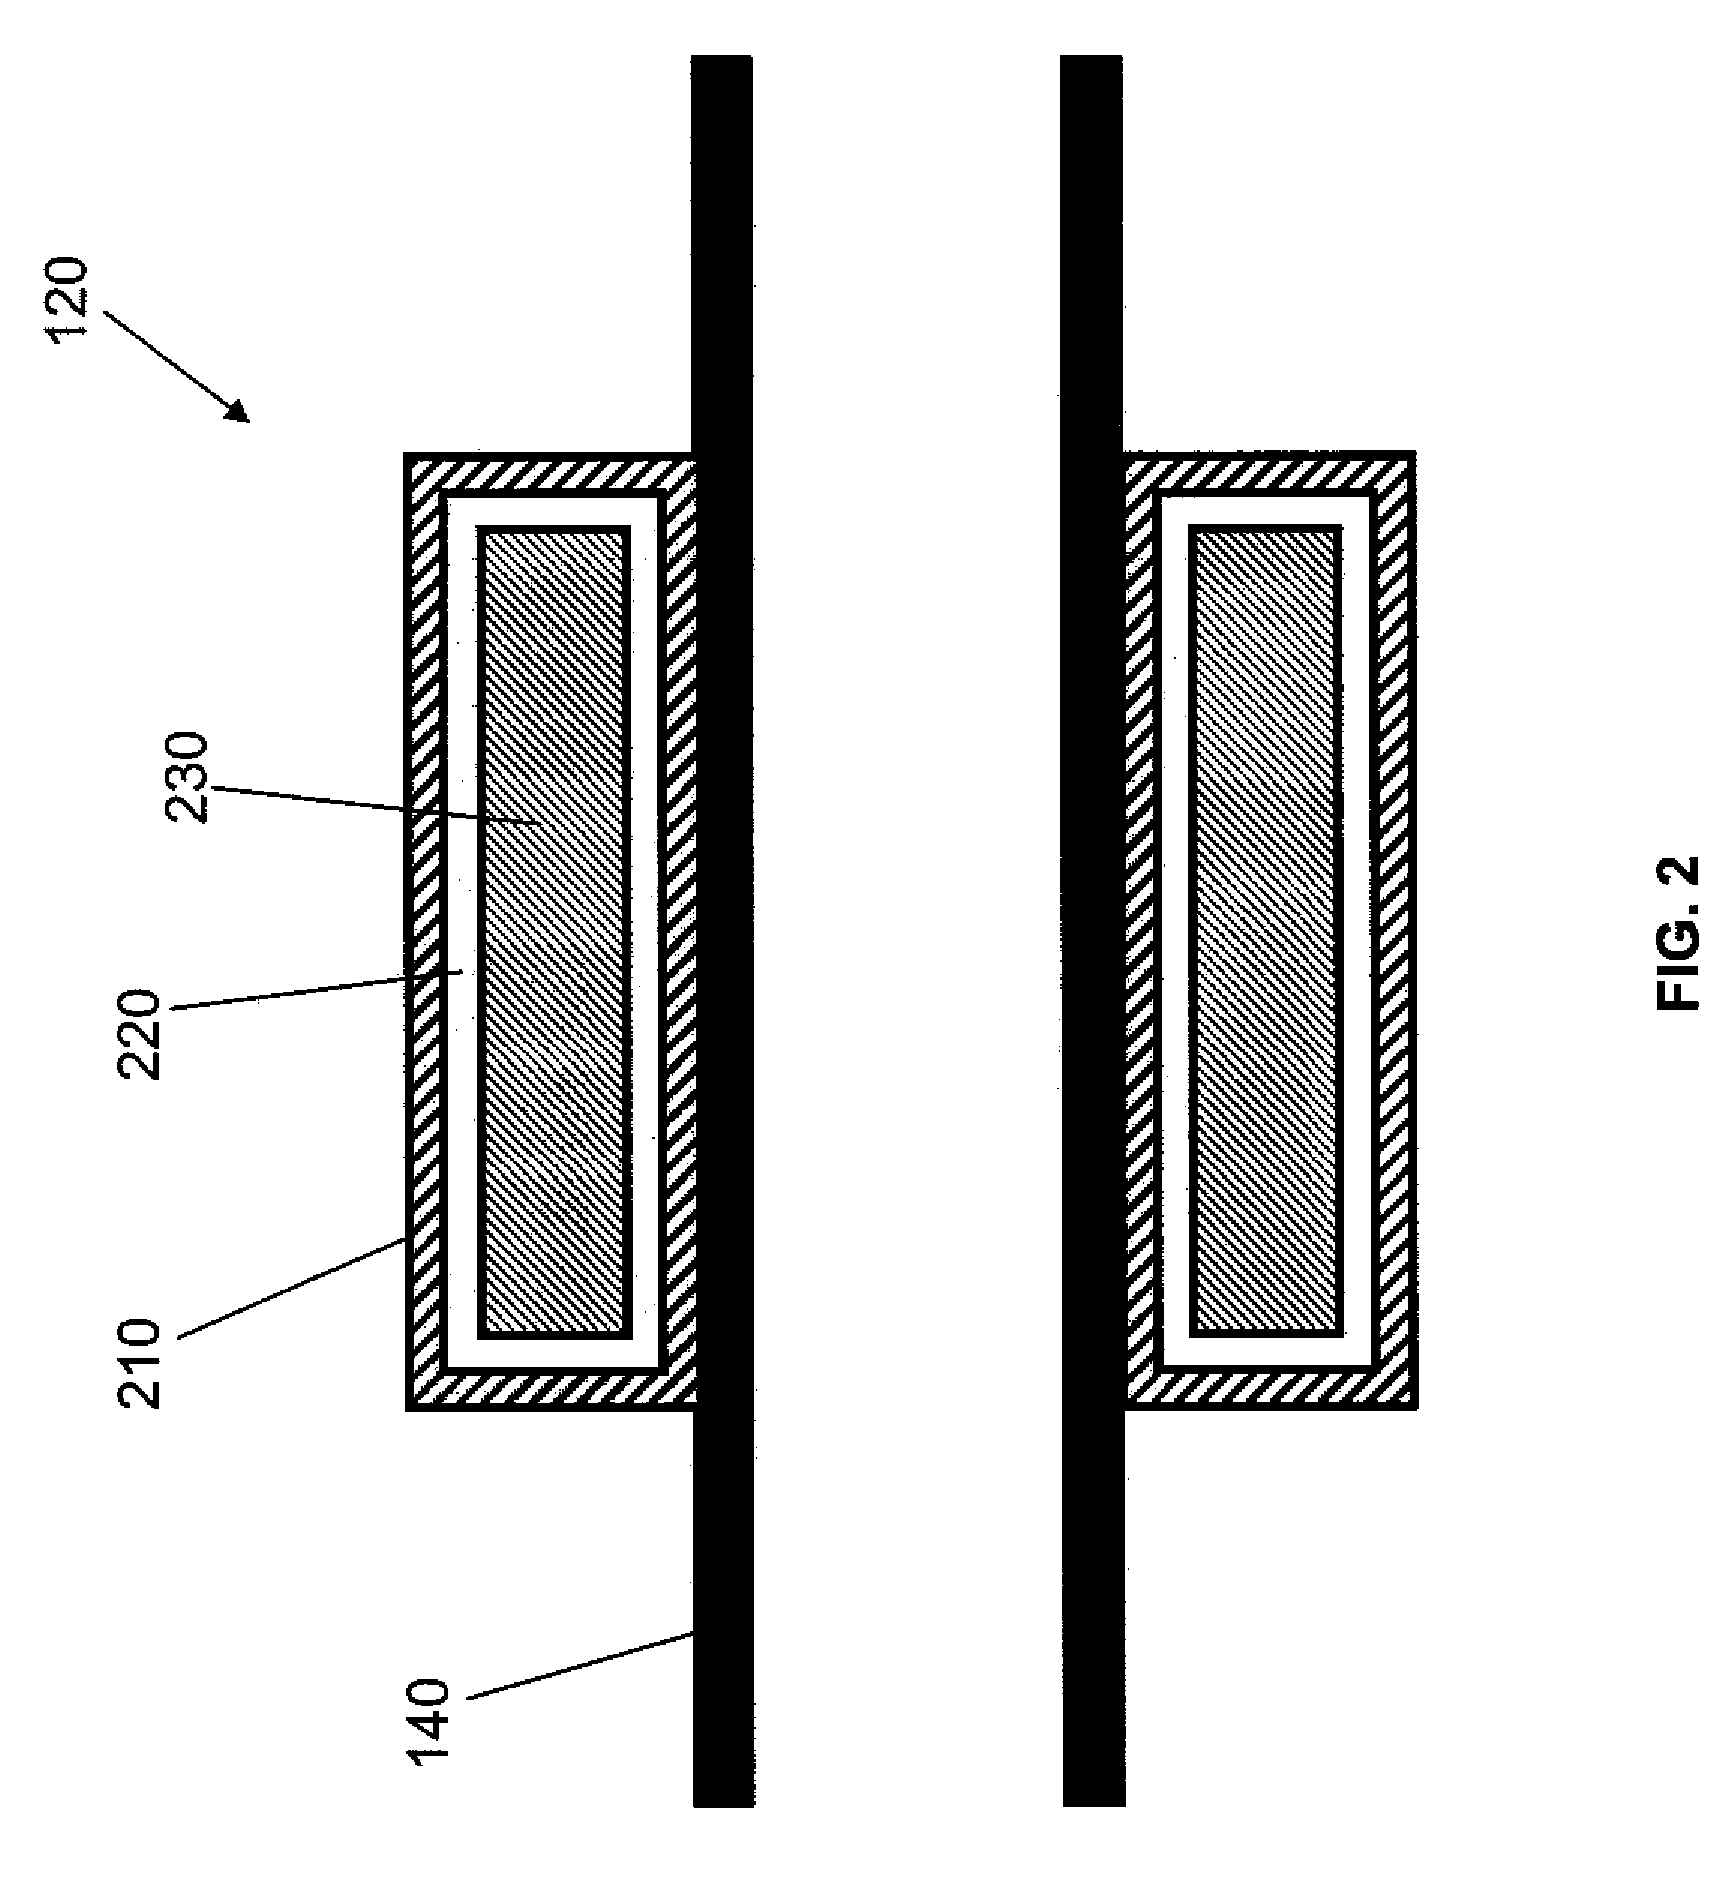 Apparatus for sealing and isolating pipelines